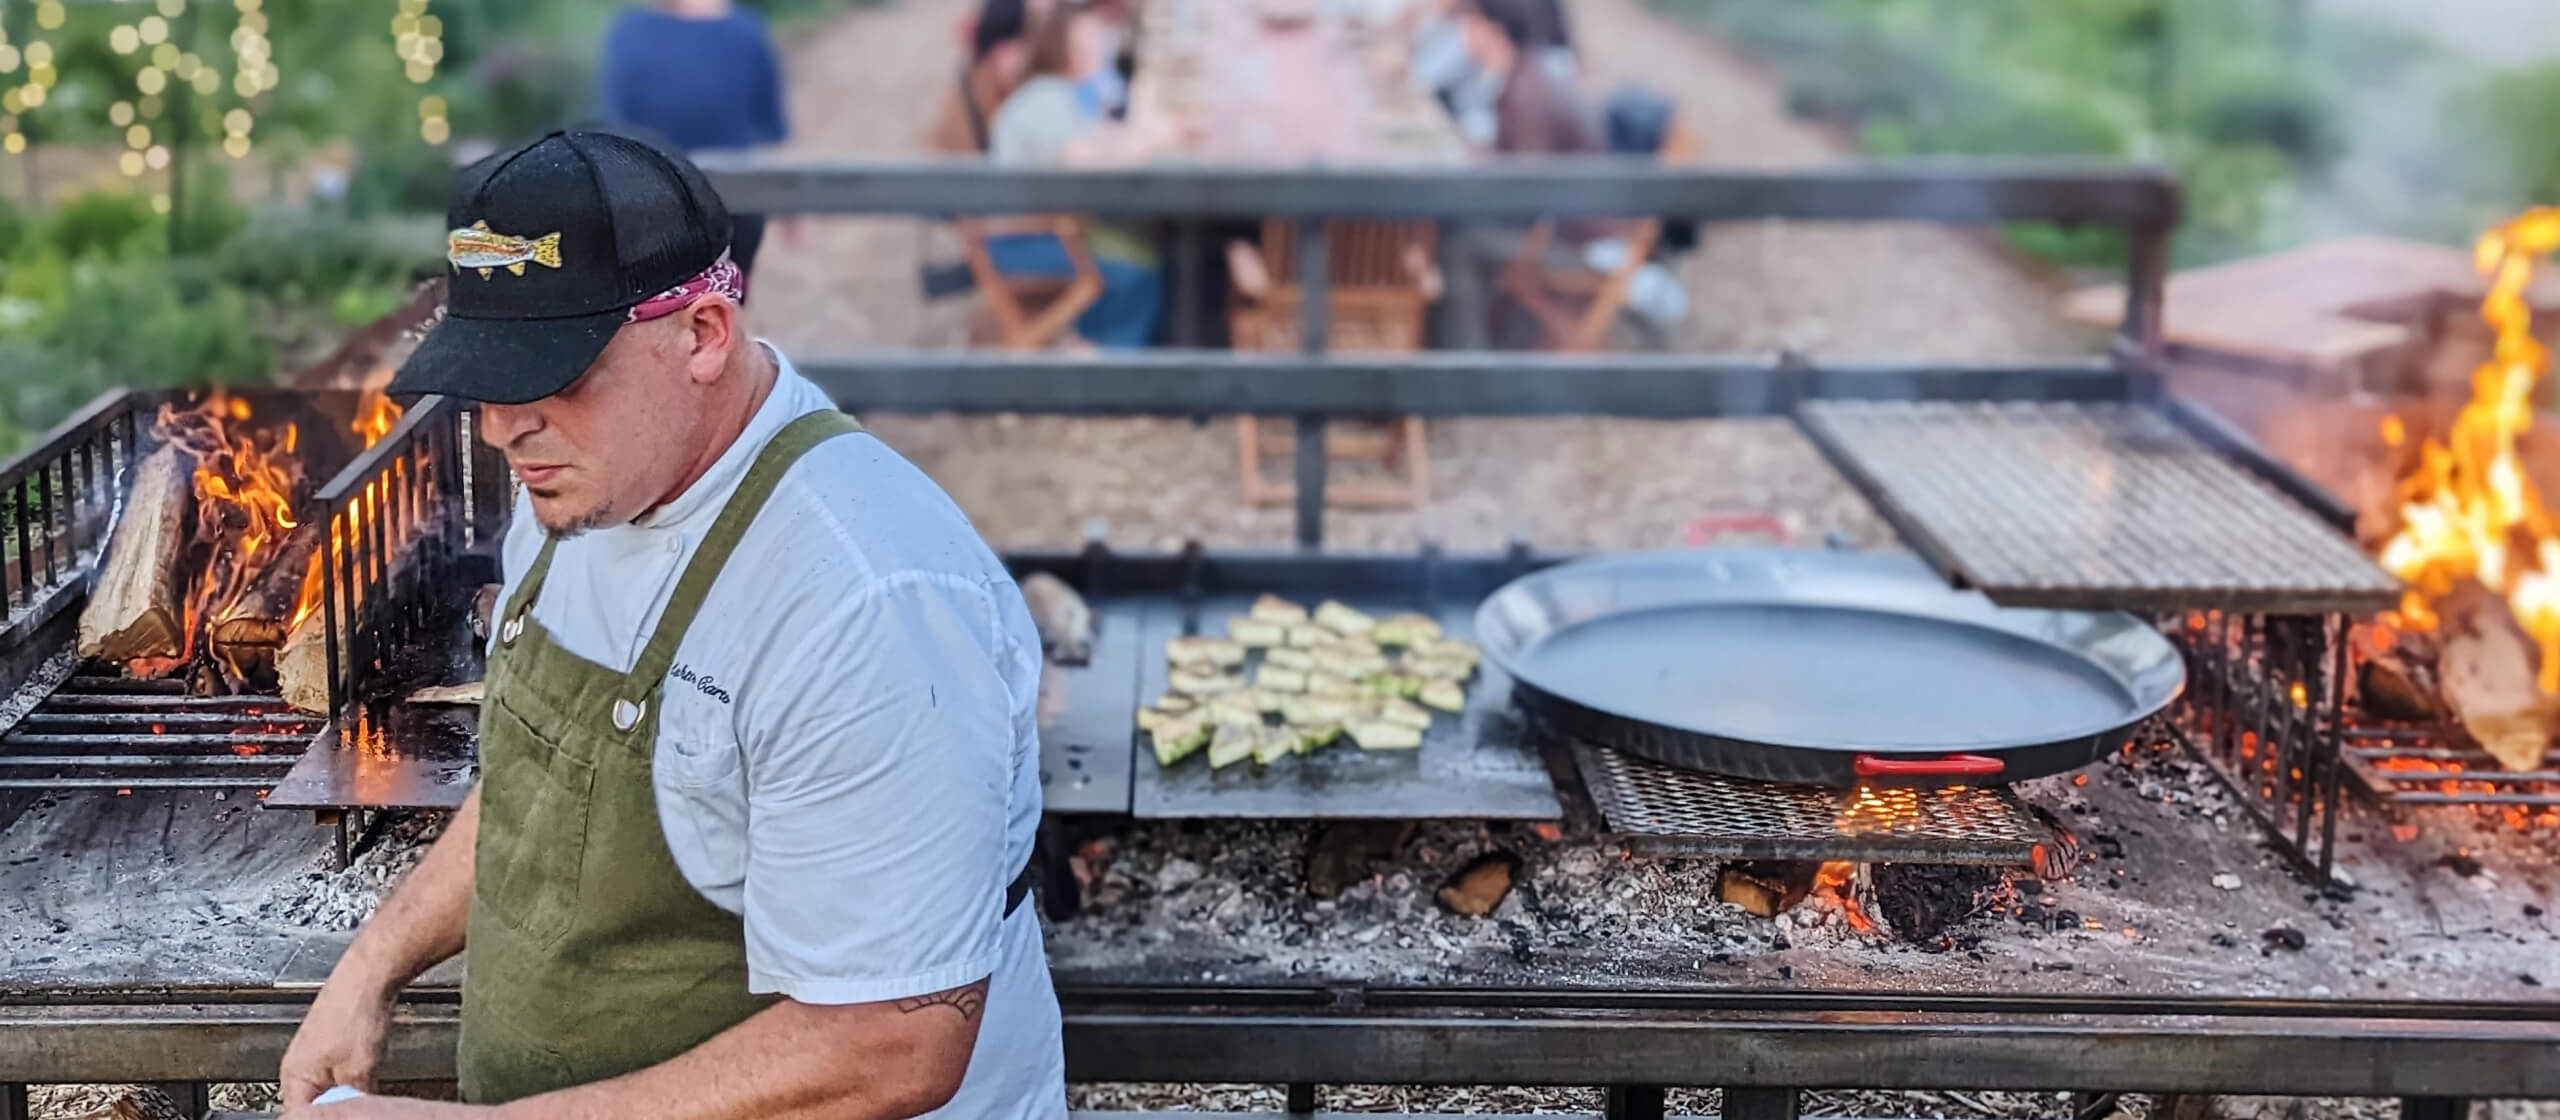 A chef cooking on an open fire with a table of people in the background.